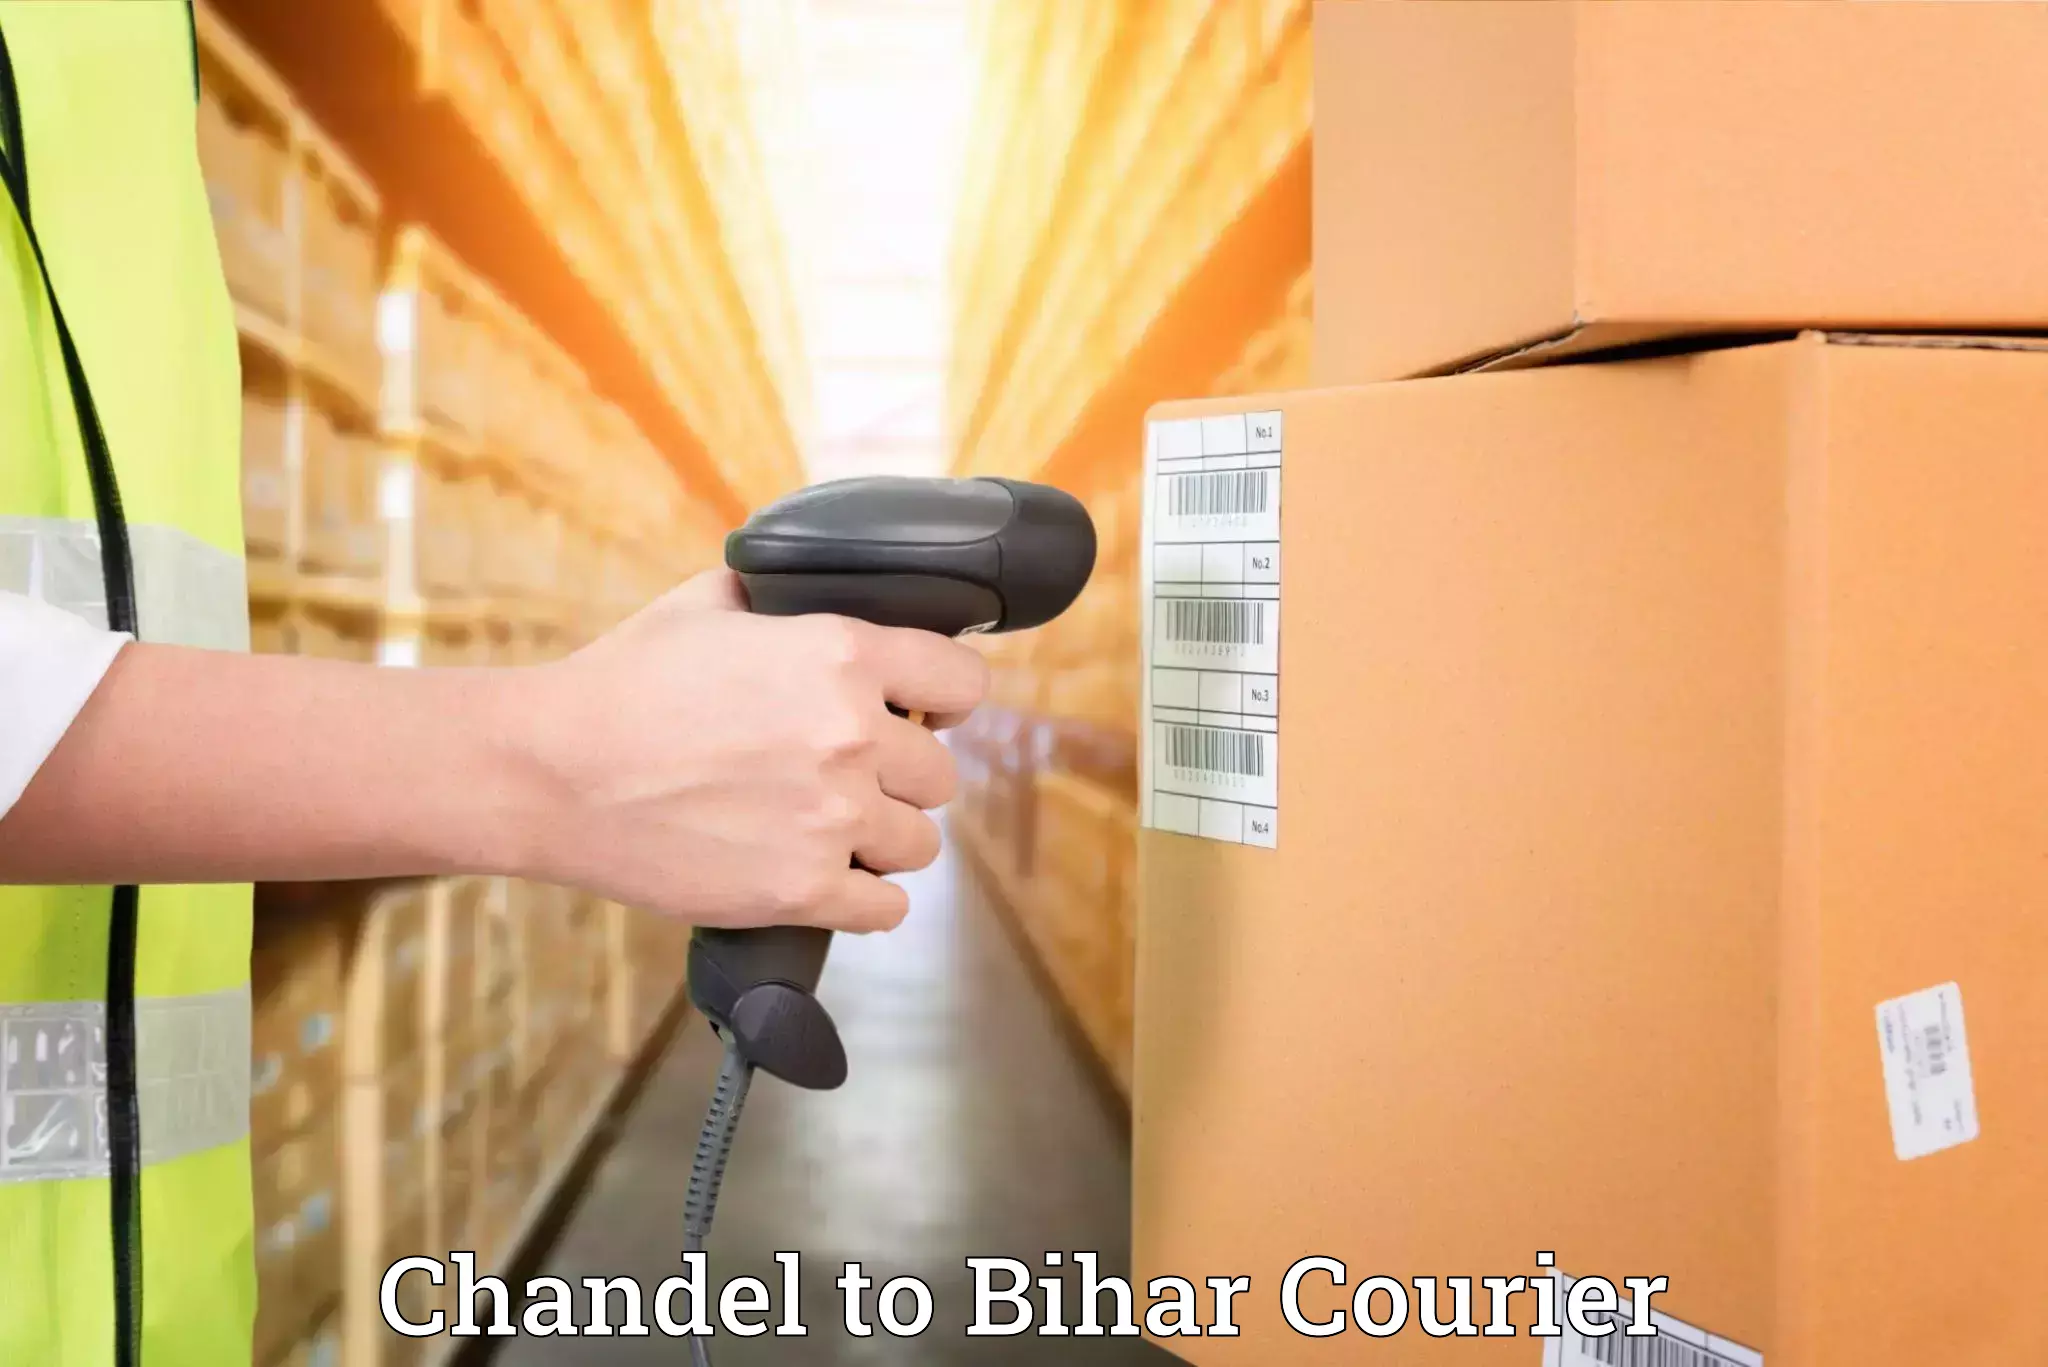 Full-service movers in Chandel to Bihar